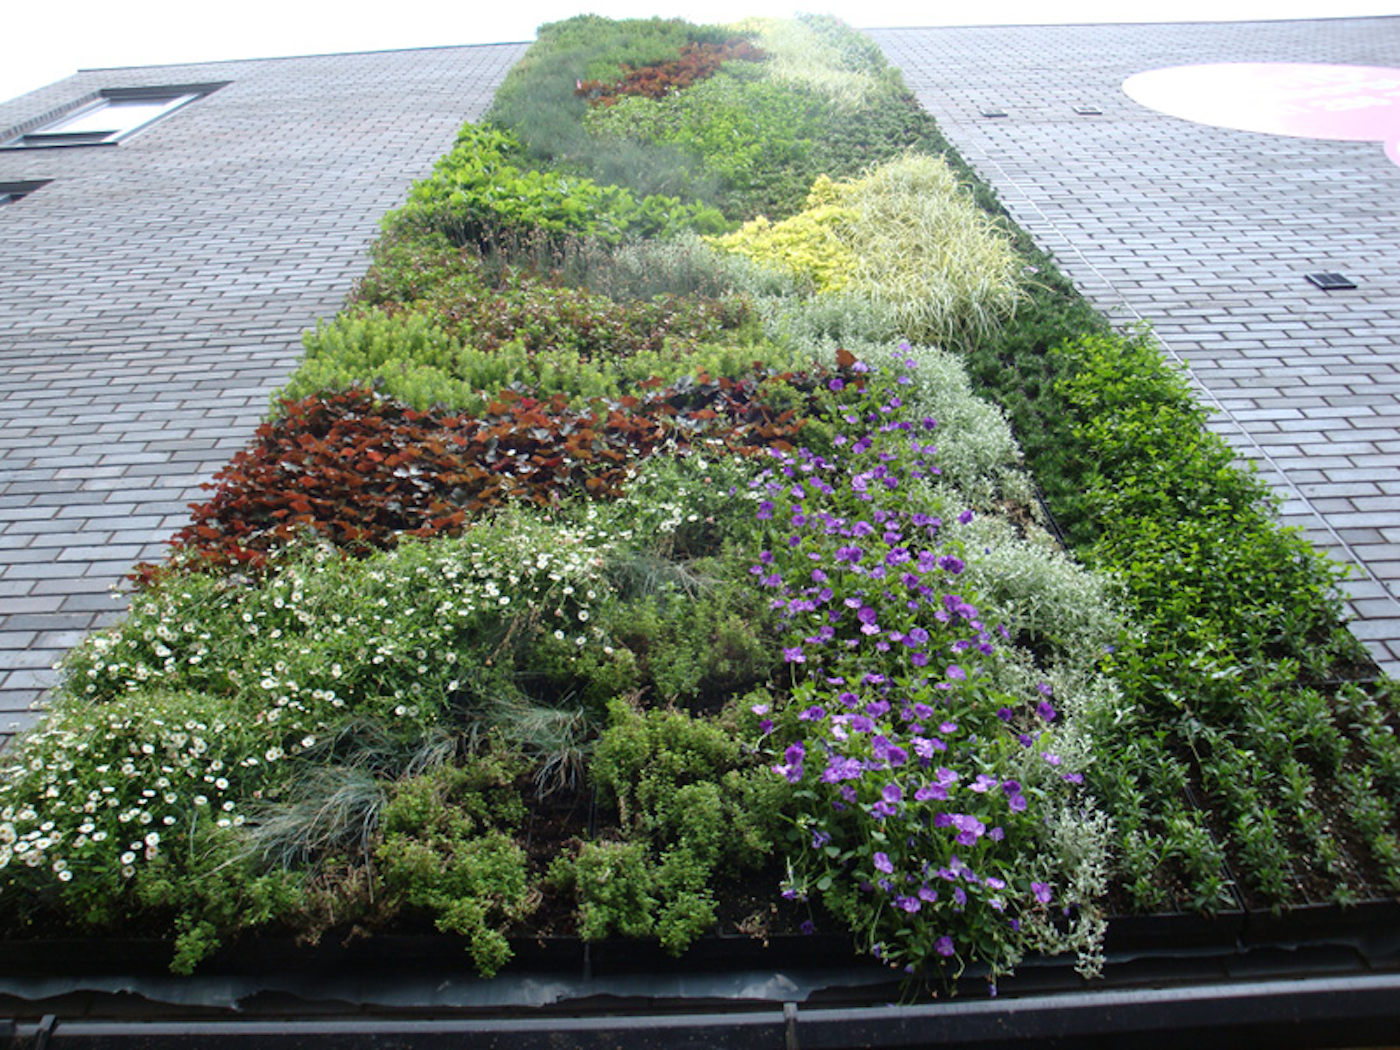 looking up at a planted wall or living wall with flowers